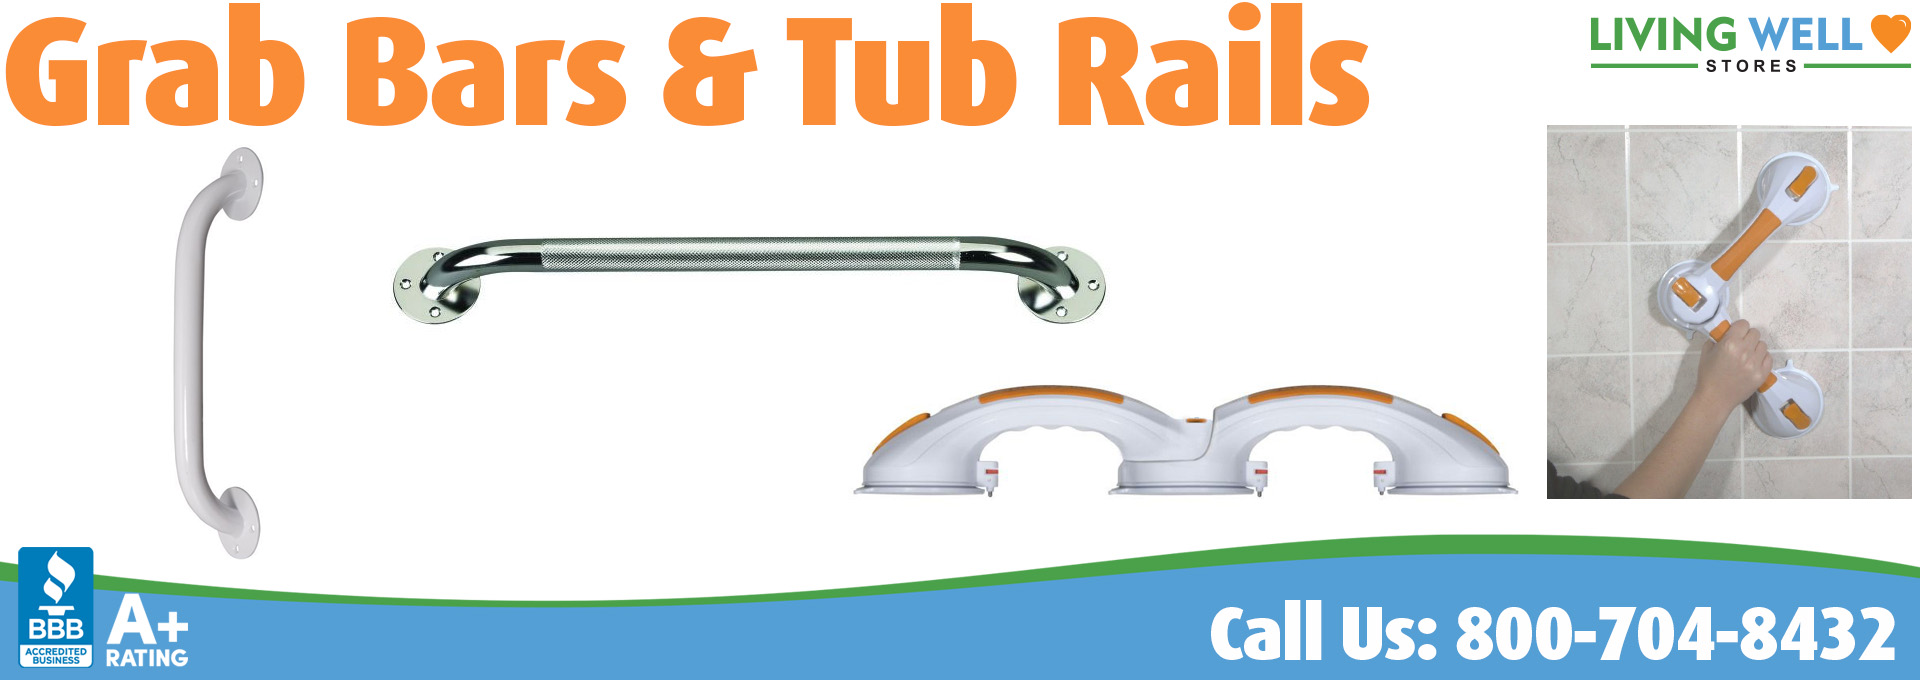 Living Well Stores: Grab Bars